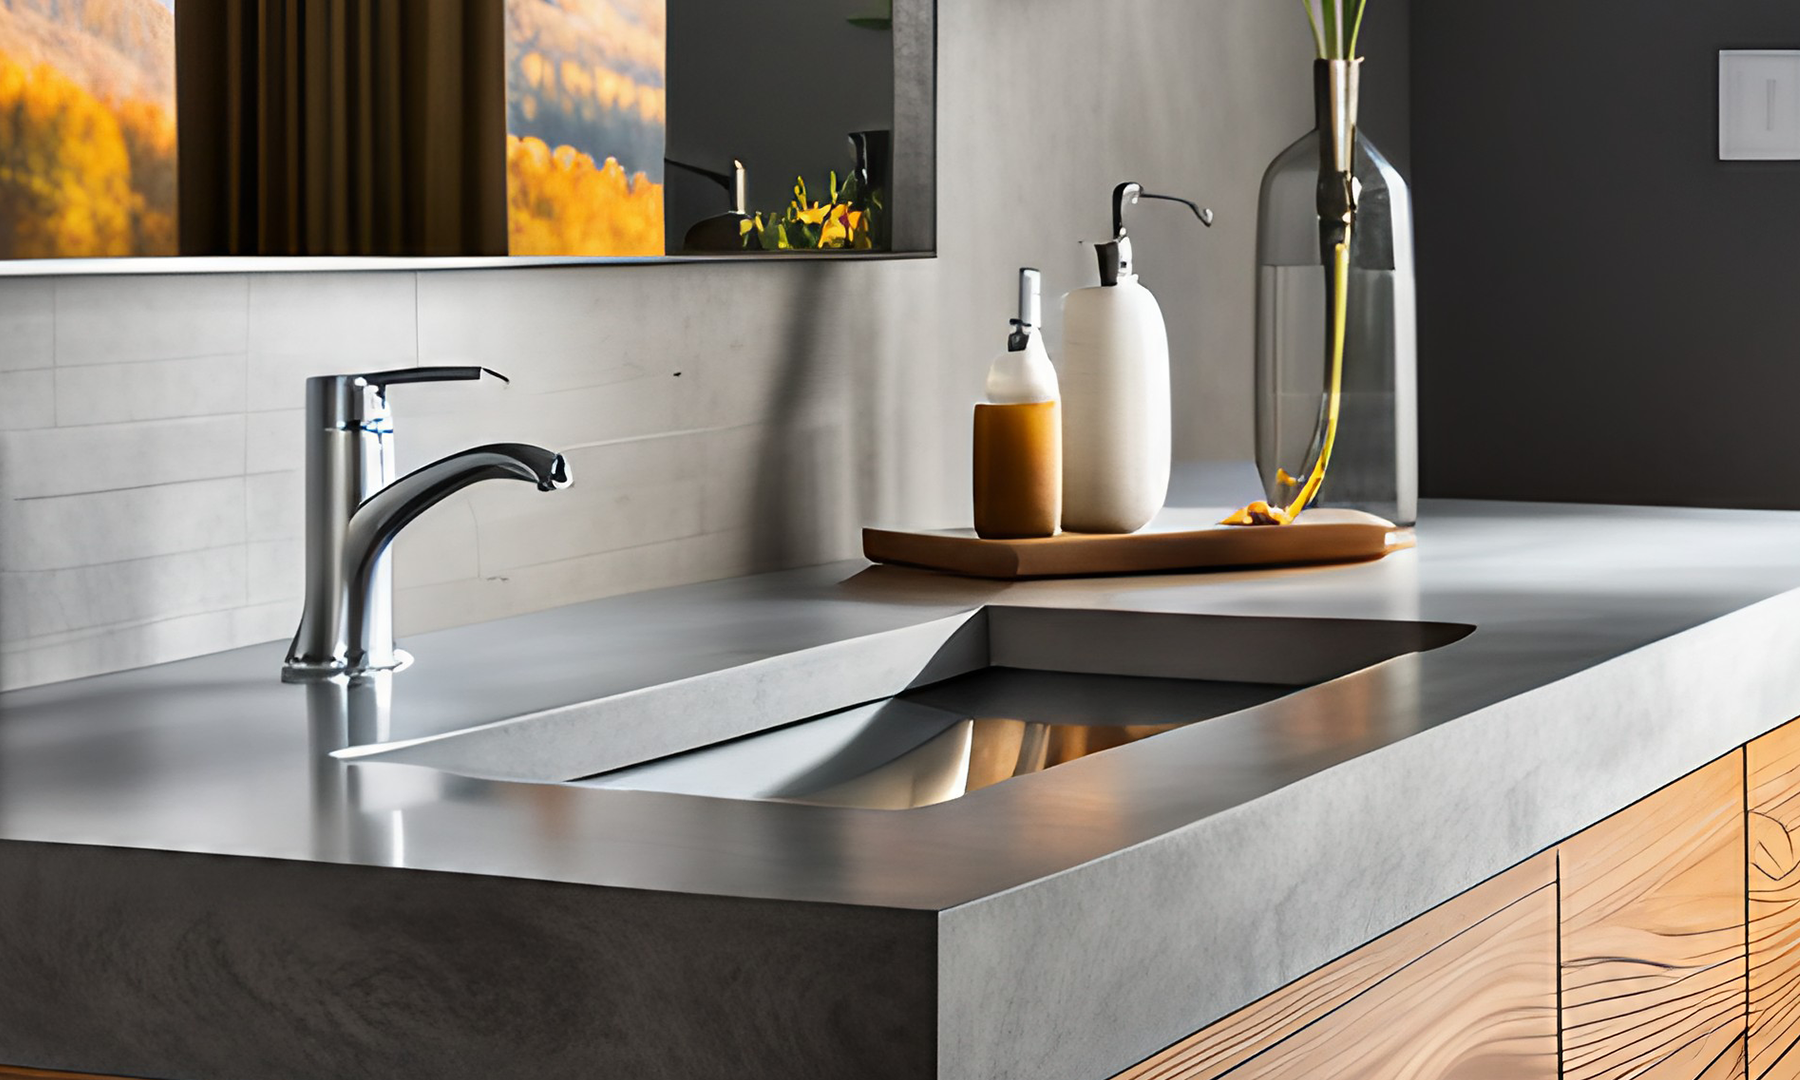 Concrete countertop in gray with stainless steel sink and faucet